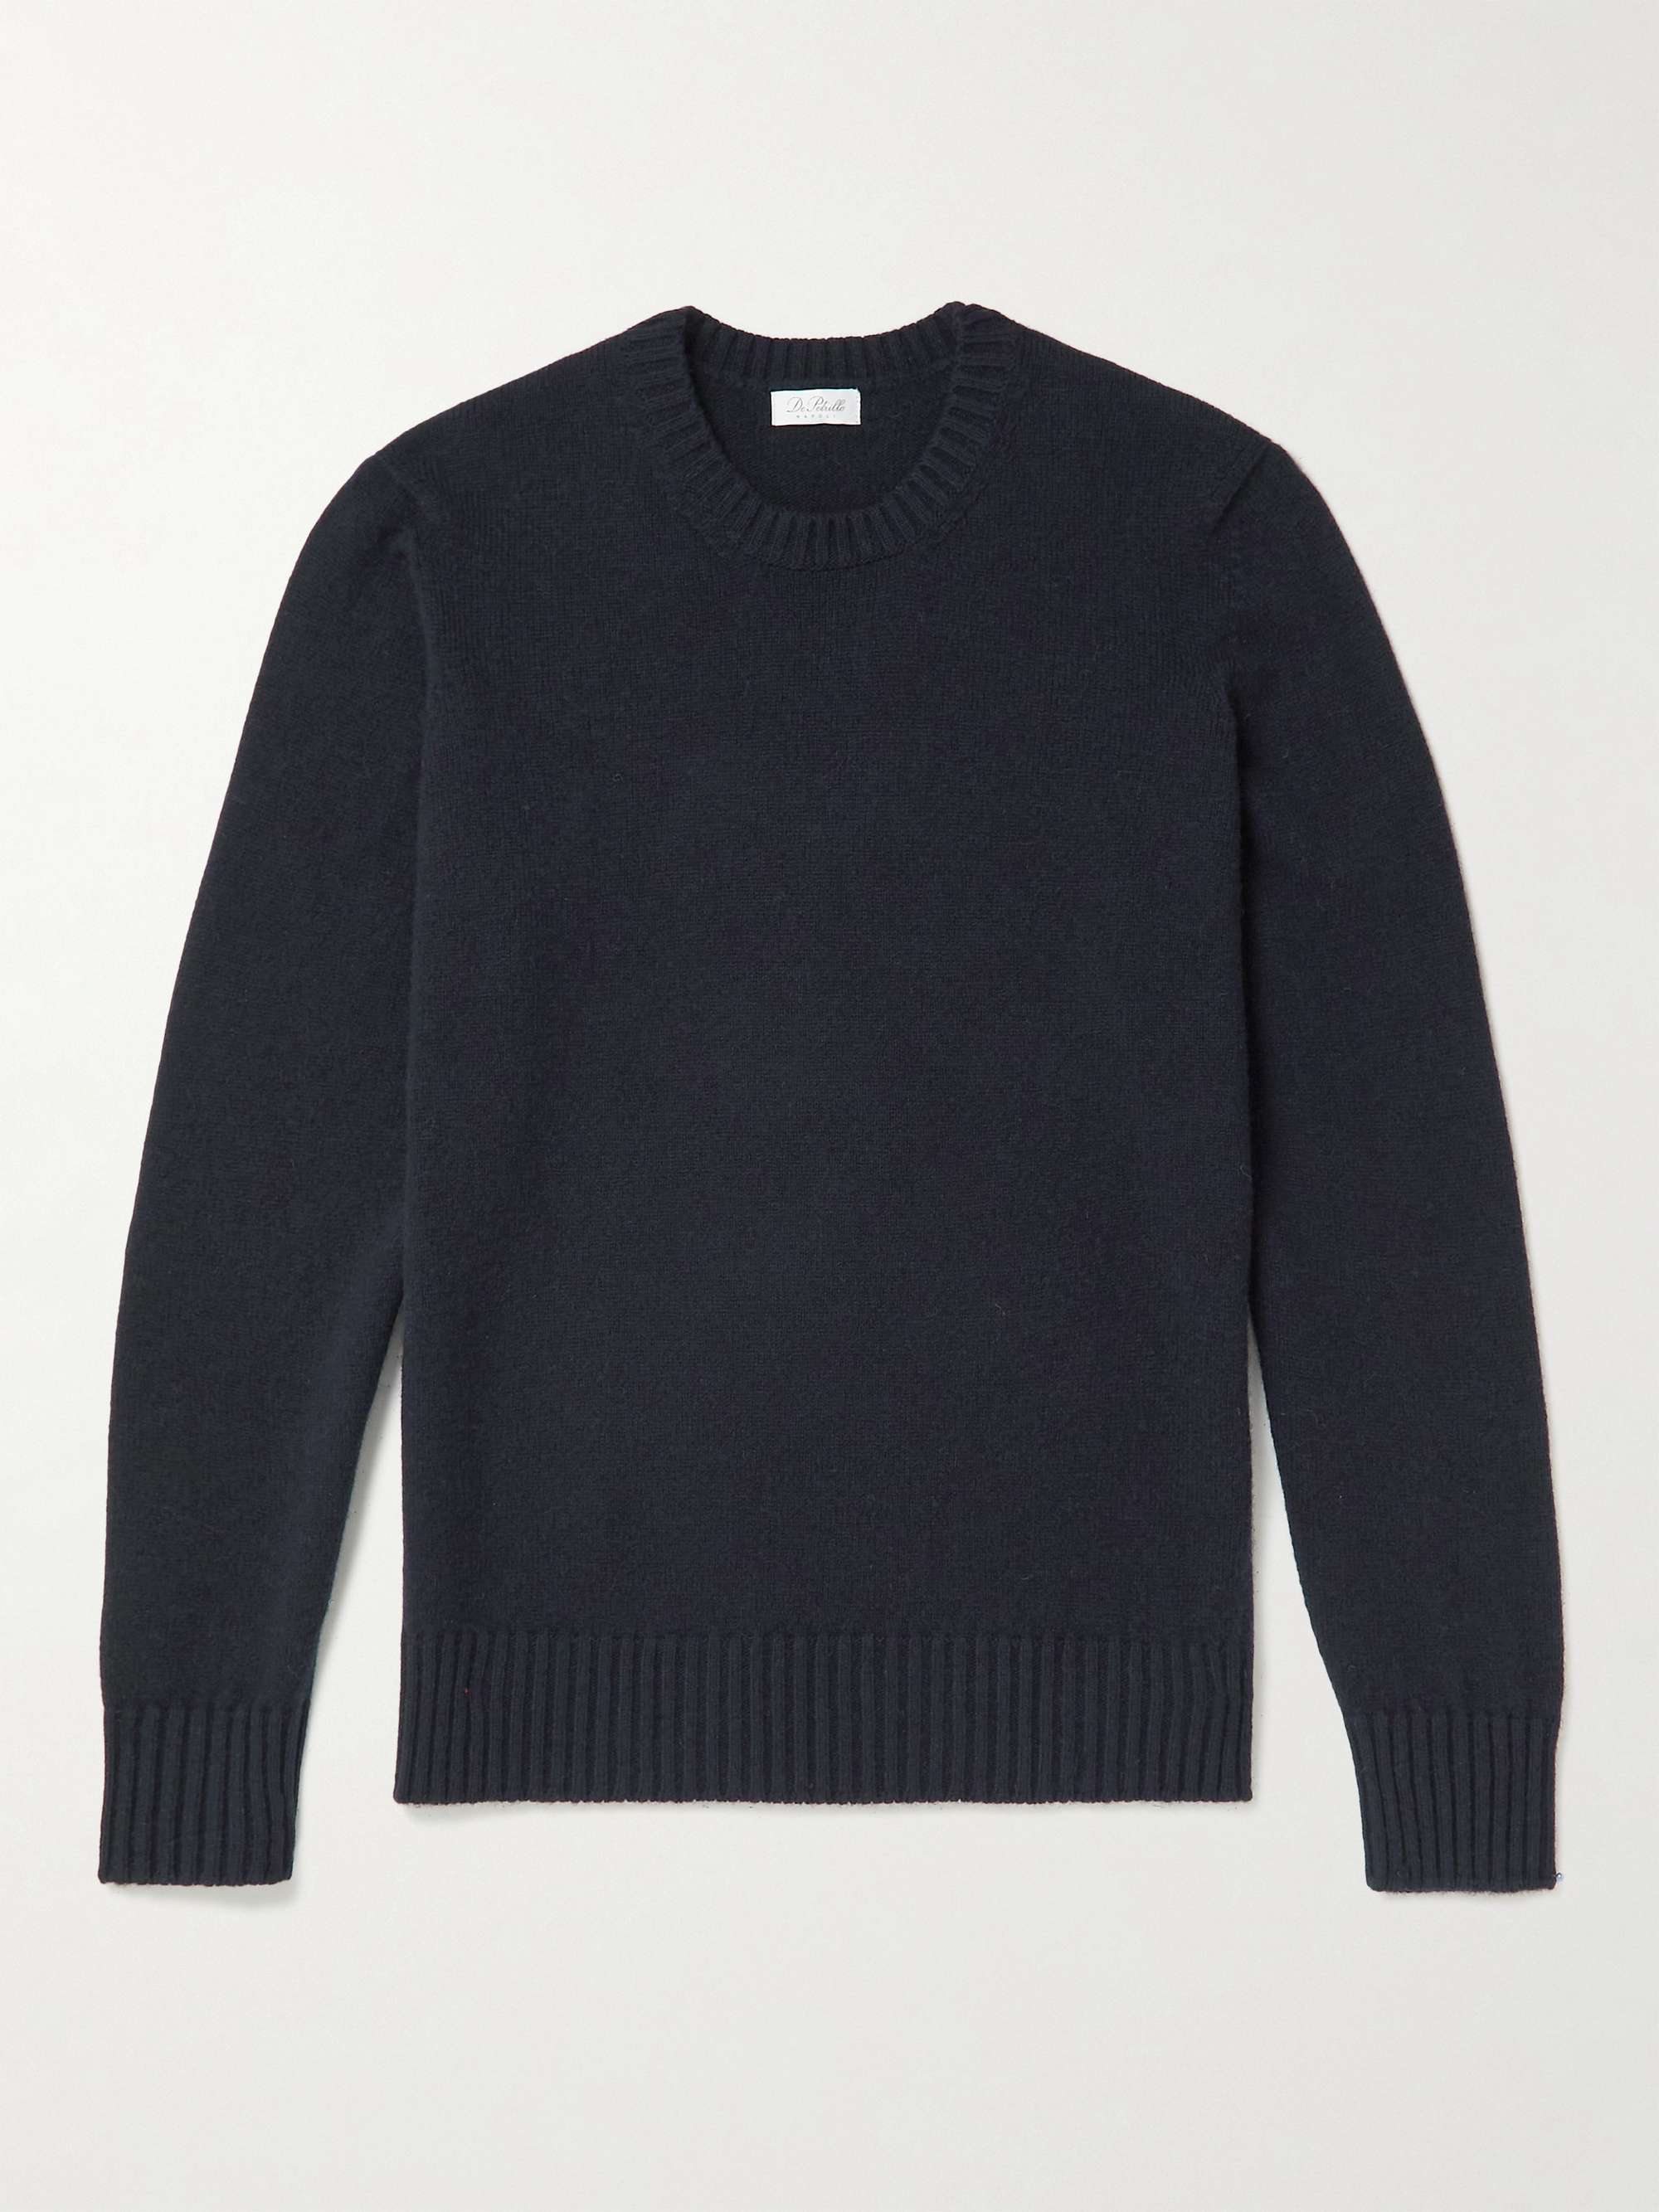 DE PETRILLO Slim-Fit Wool and Cashmere-Blend Sweater